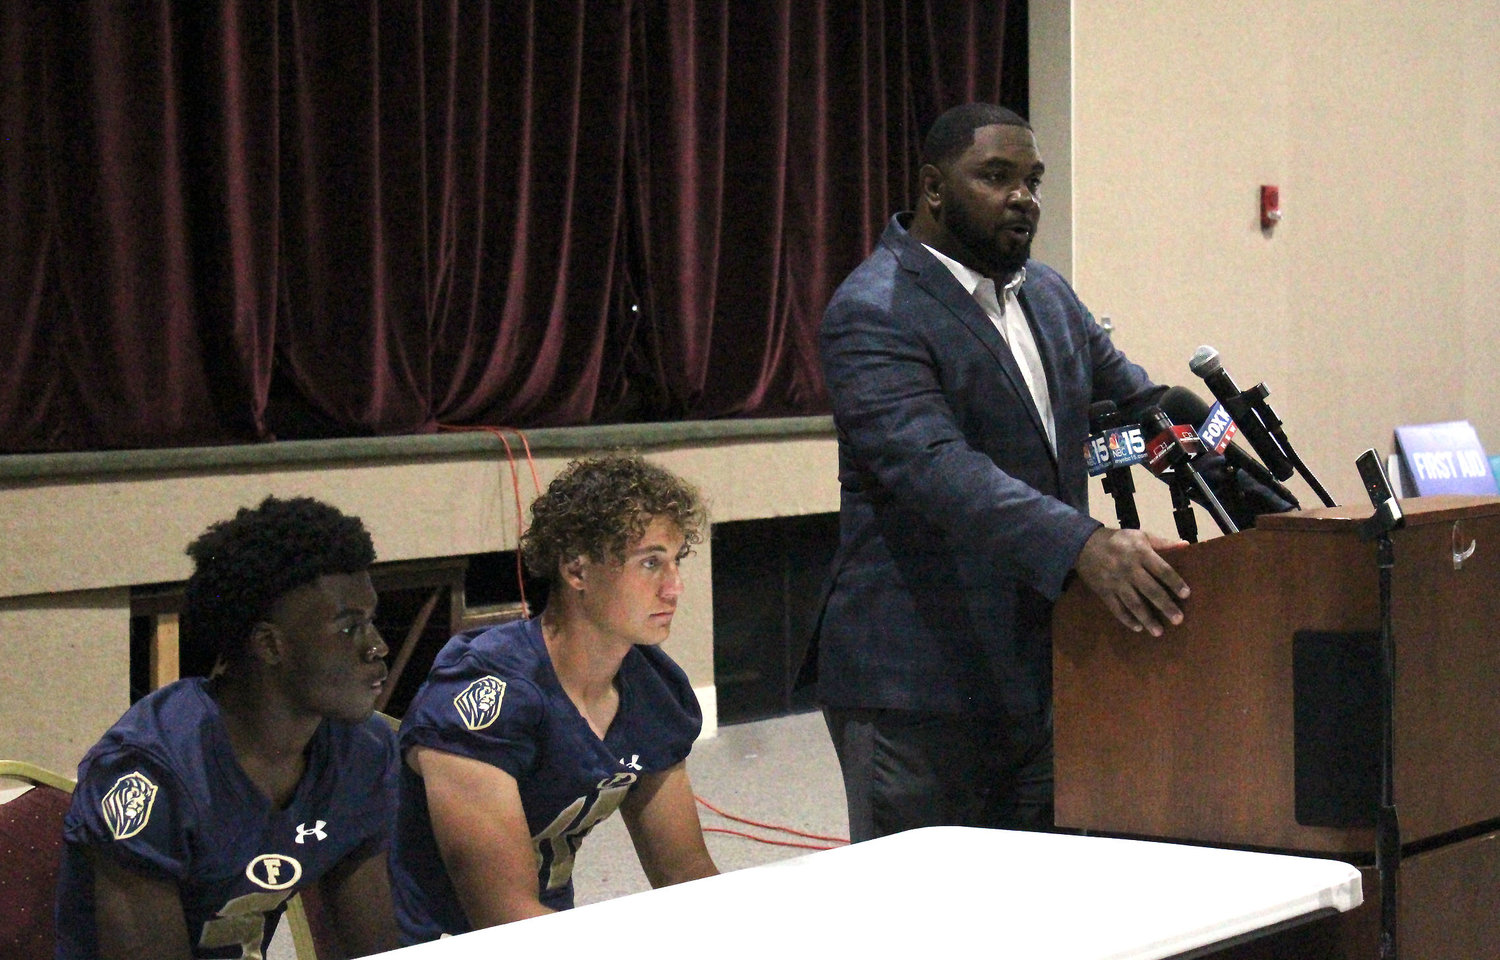 Harrison Knight (3), Reece Tynes (10) and head coach Deric Scott represented the Foley Lions at July 13’s Baldwin County Media Day event at Daphne High School.